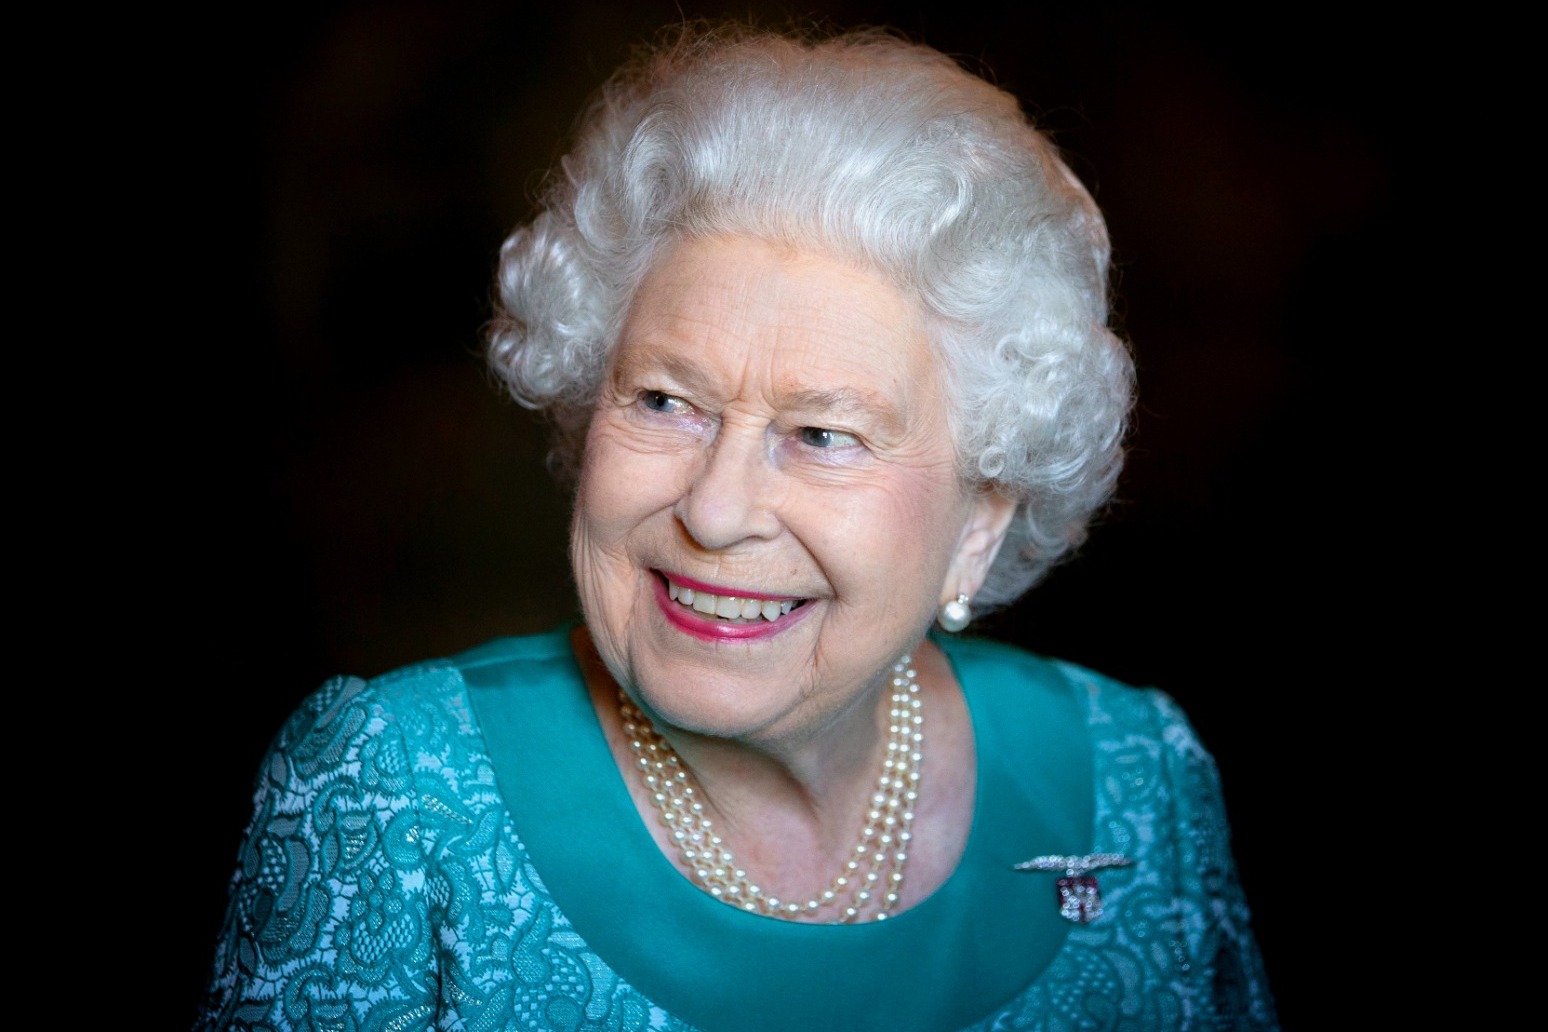 New documentary sheds light on Queen Elizabeth’s final days 